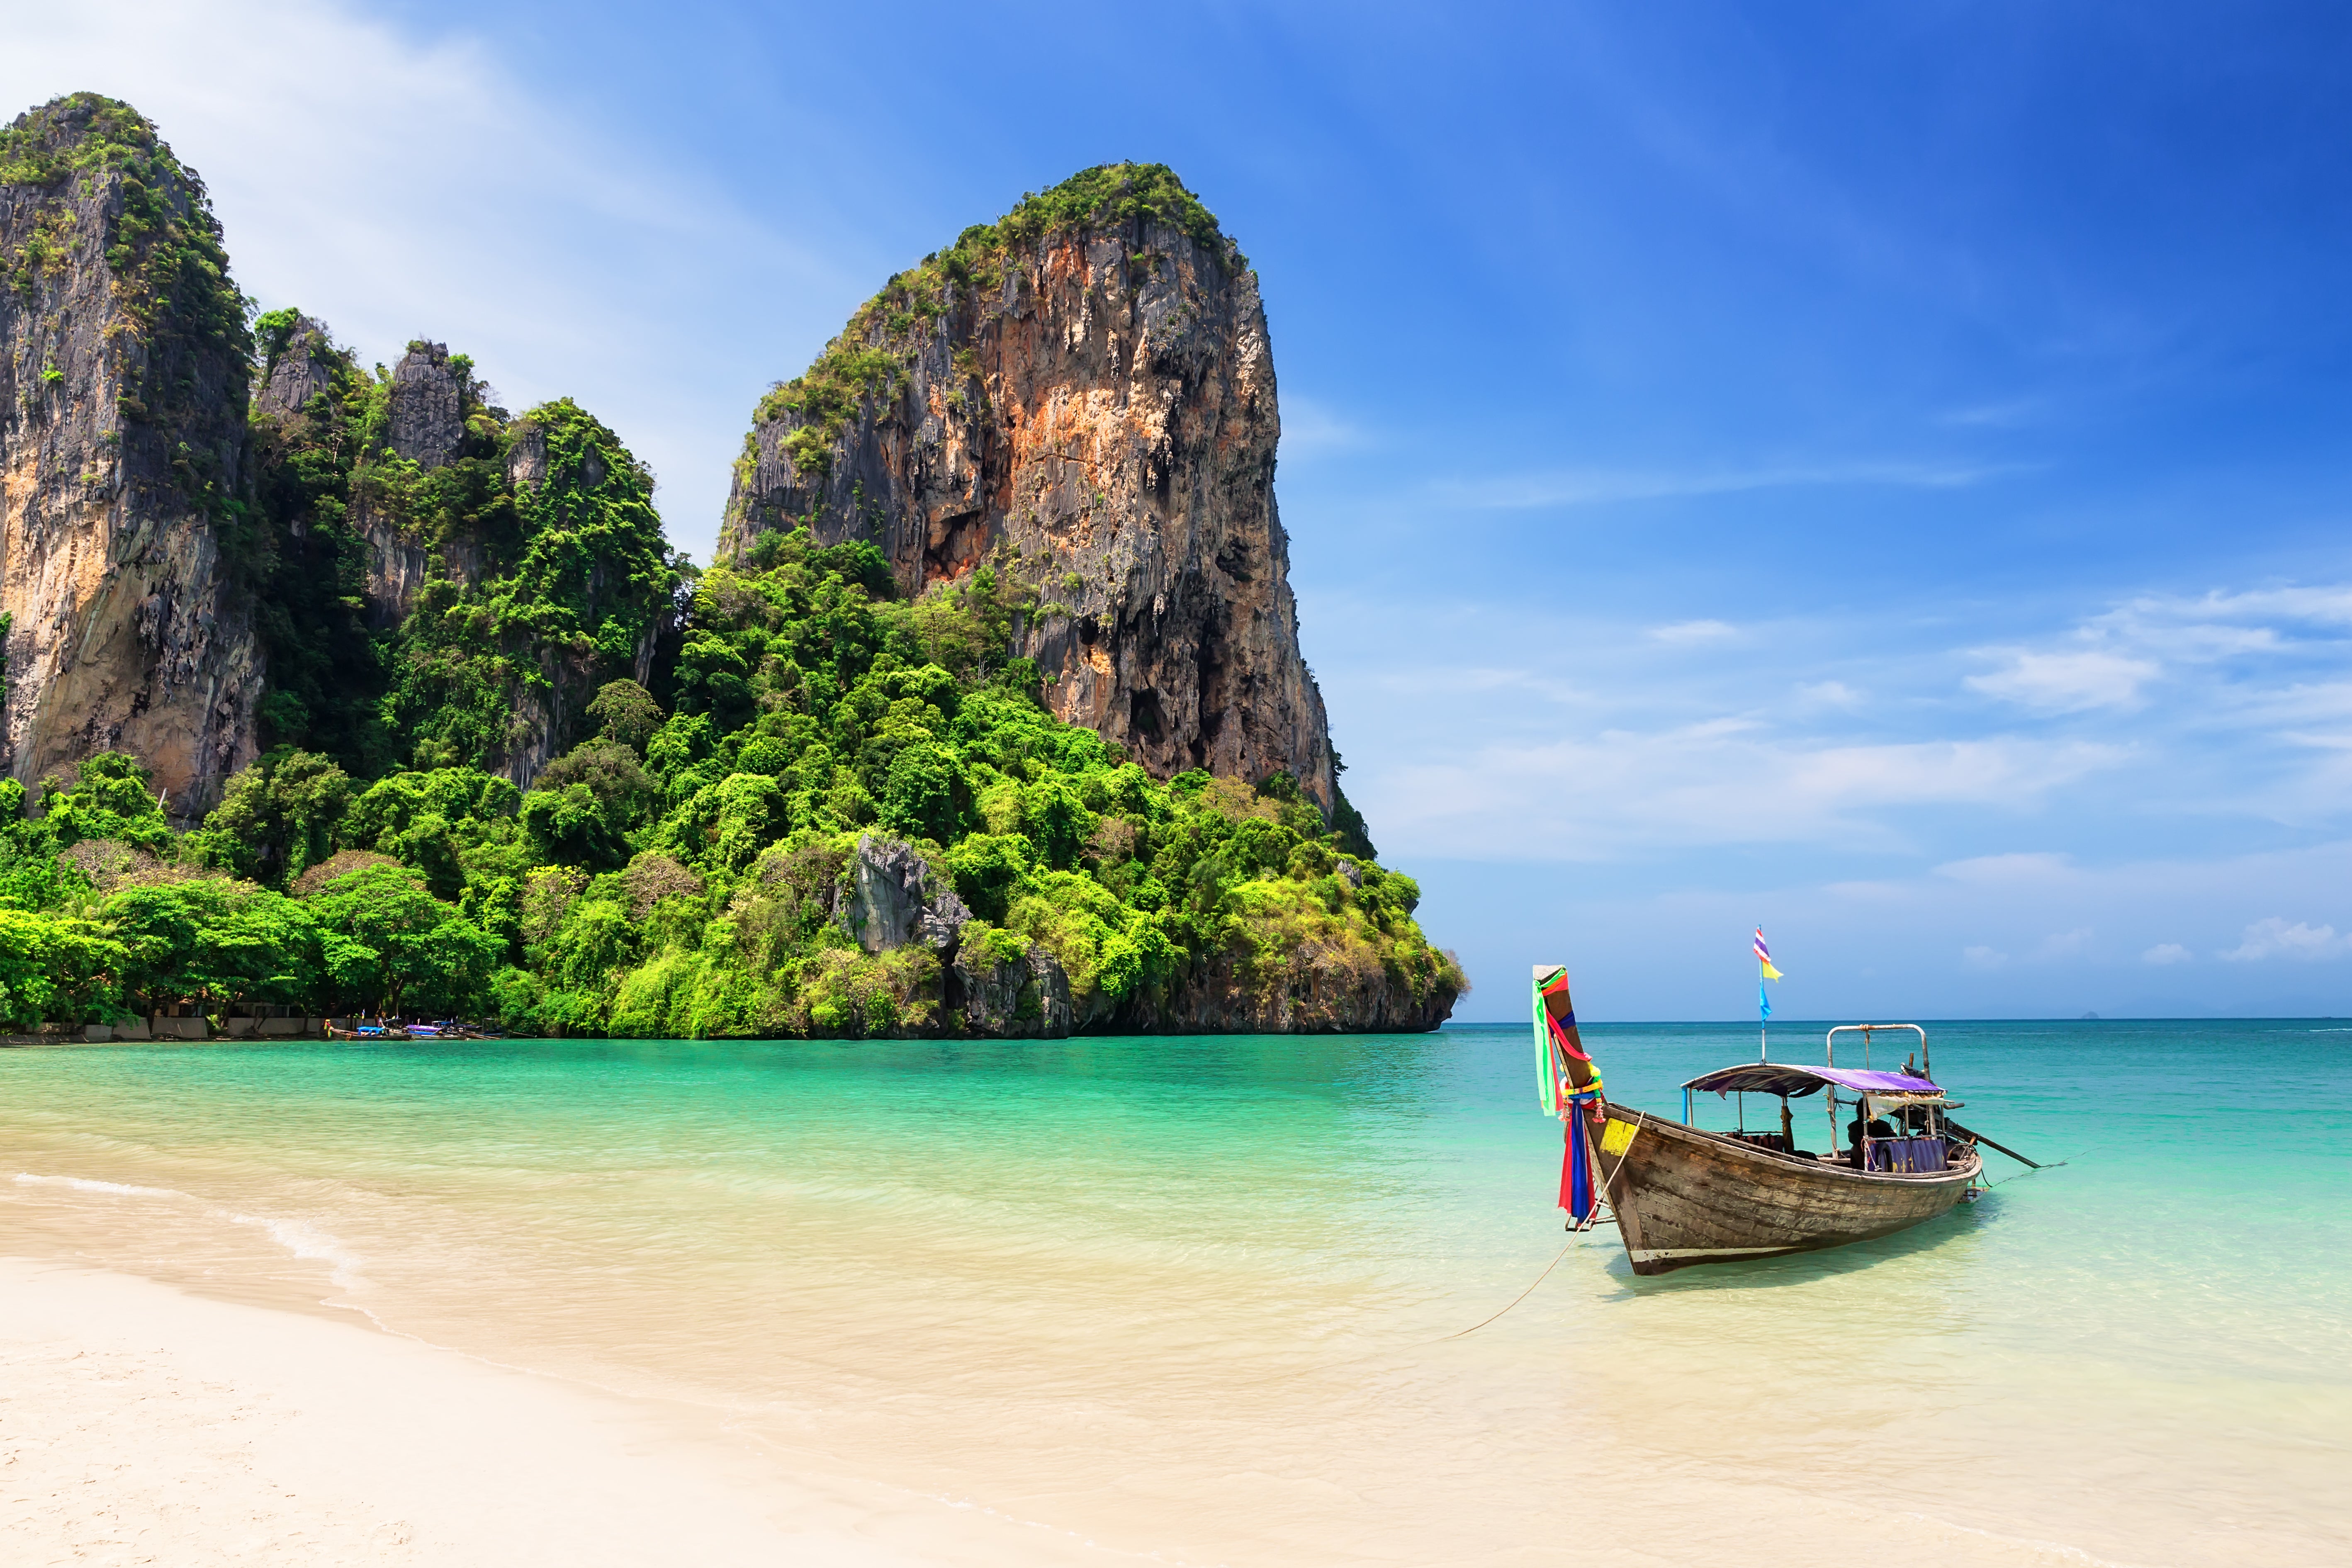 Combine tradition and culture with luxury in Thailand